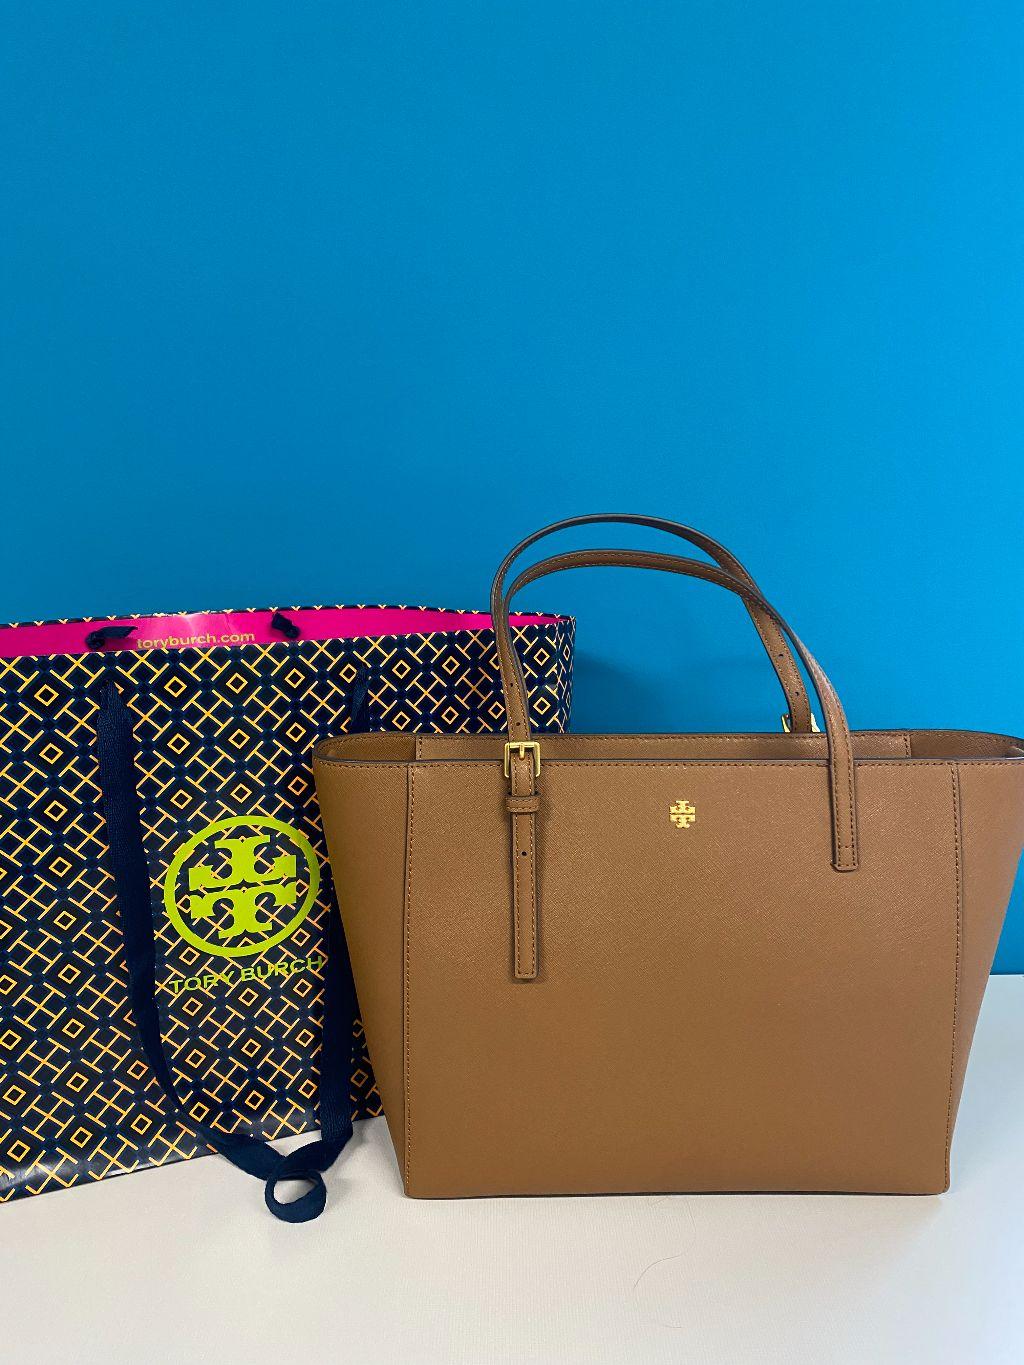 Tory Burch Small Tote